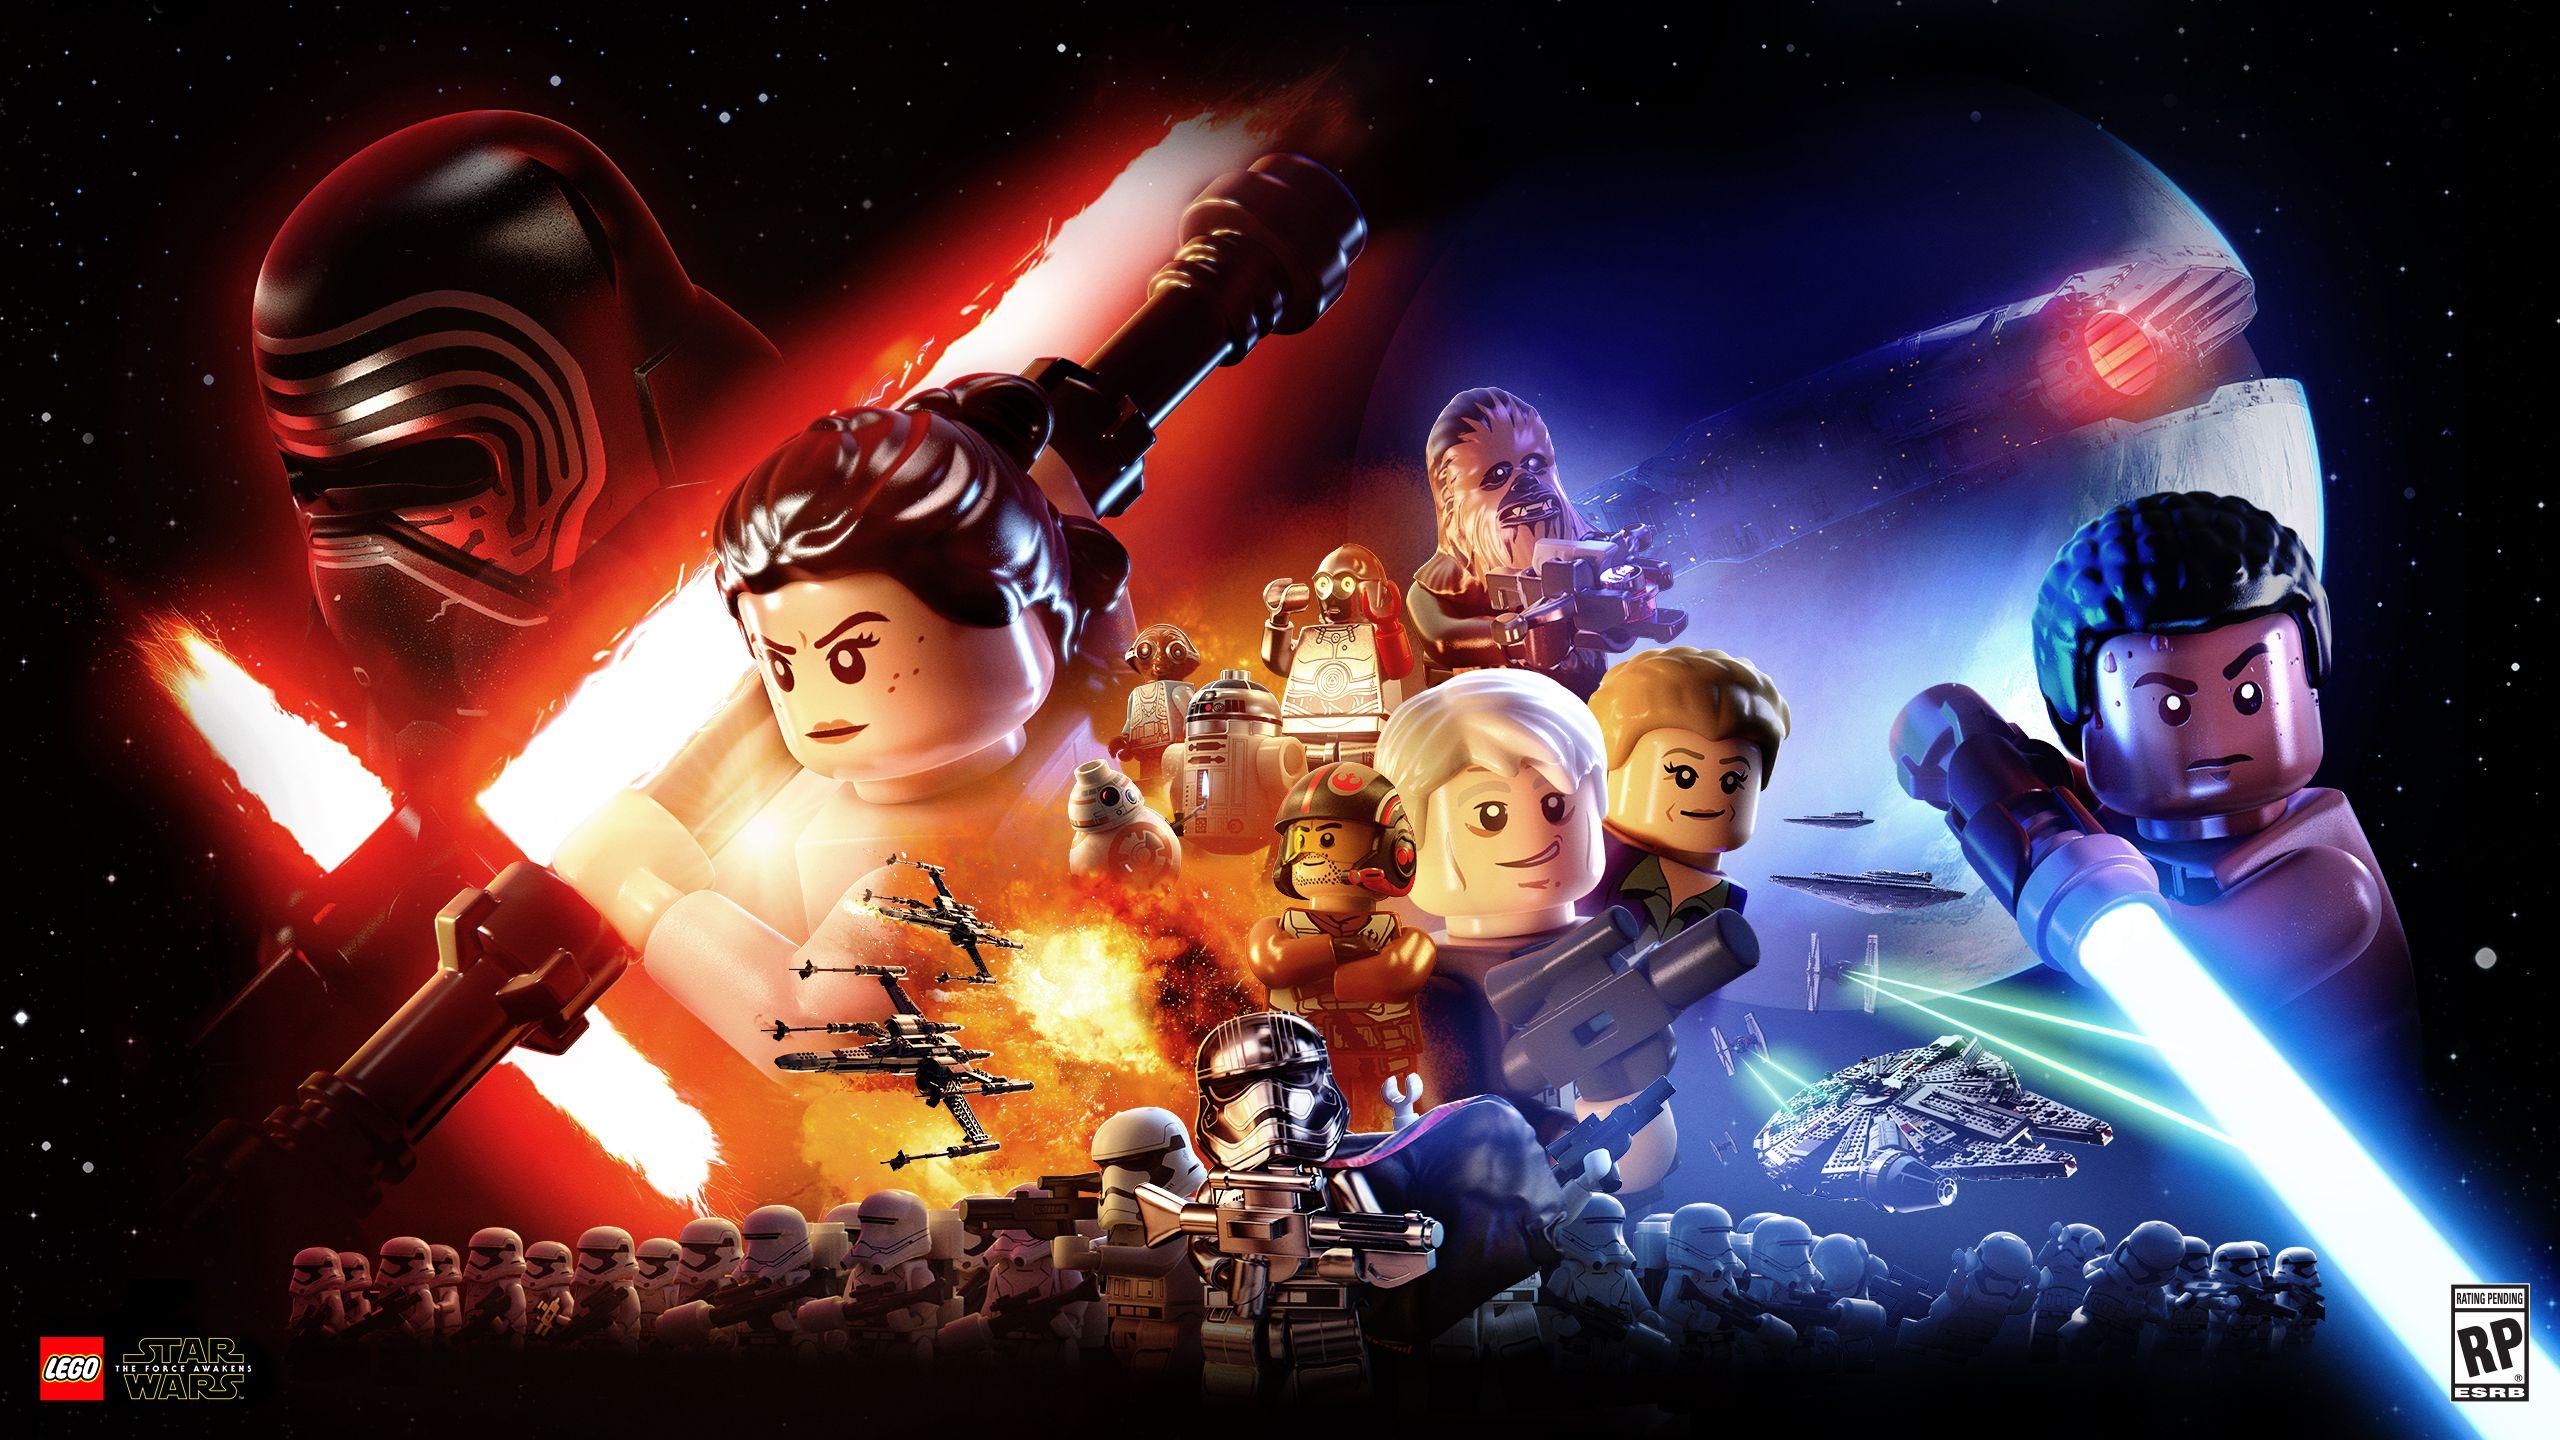 2560x1440 LEGO Star Wars: The Force Awakens Video Game - Standard Edition